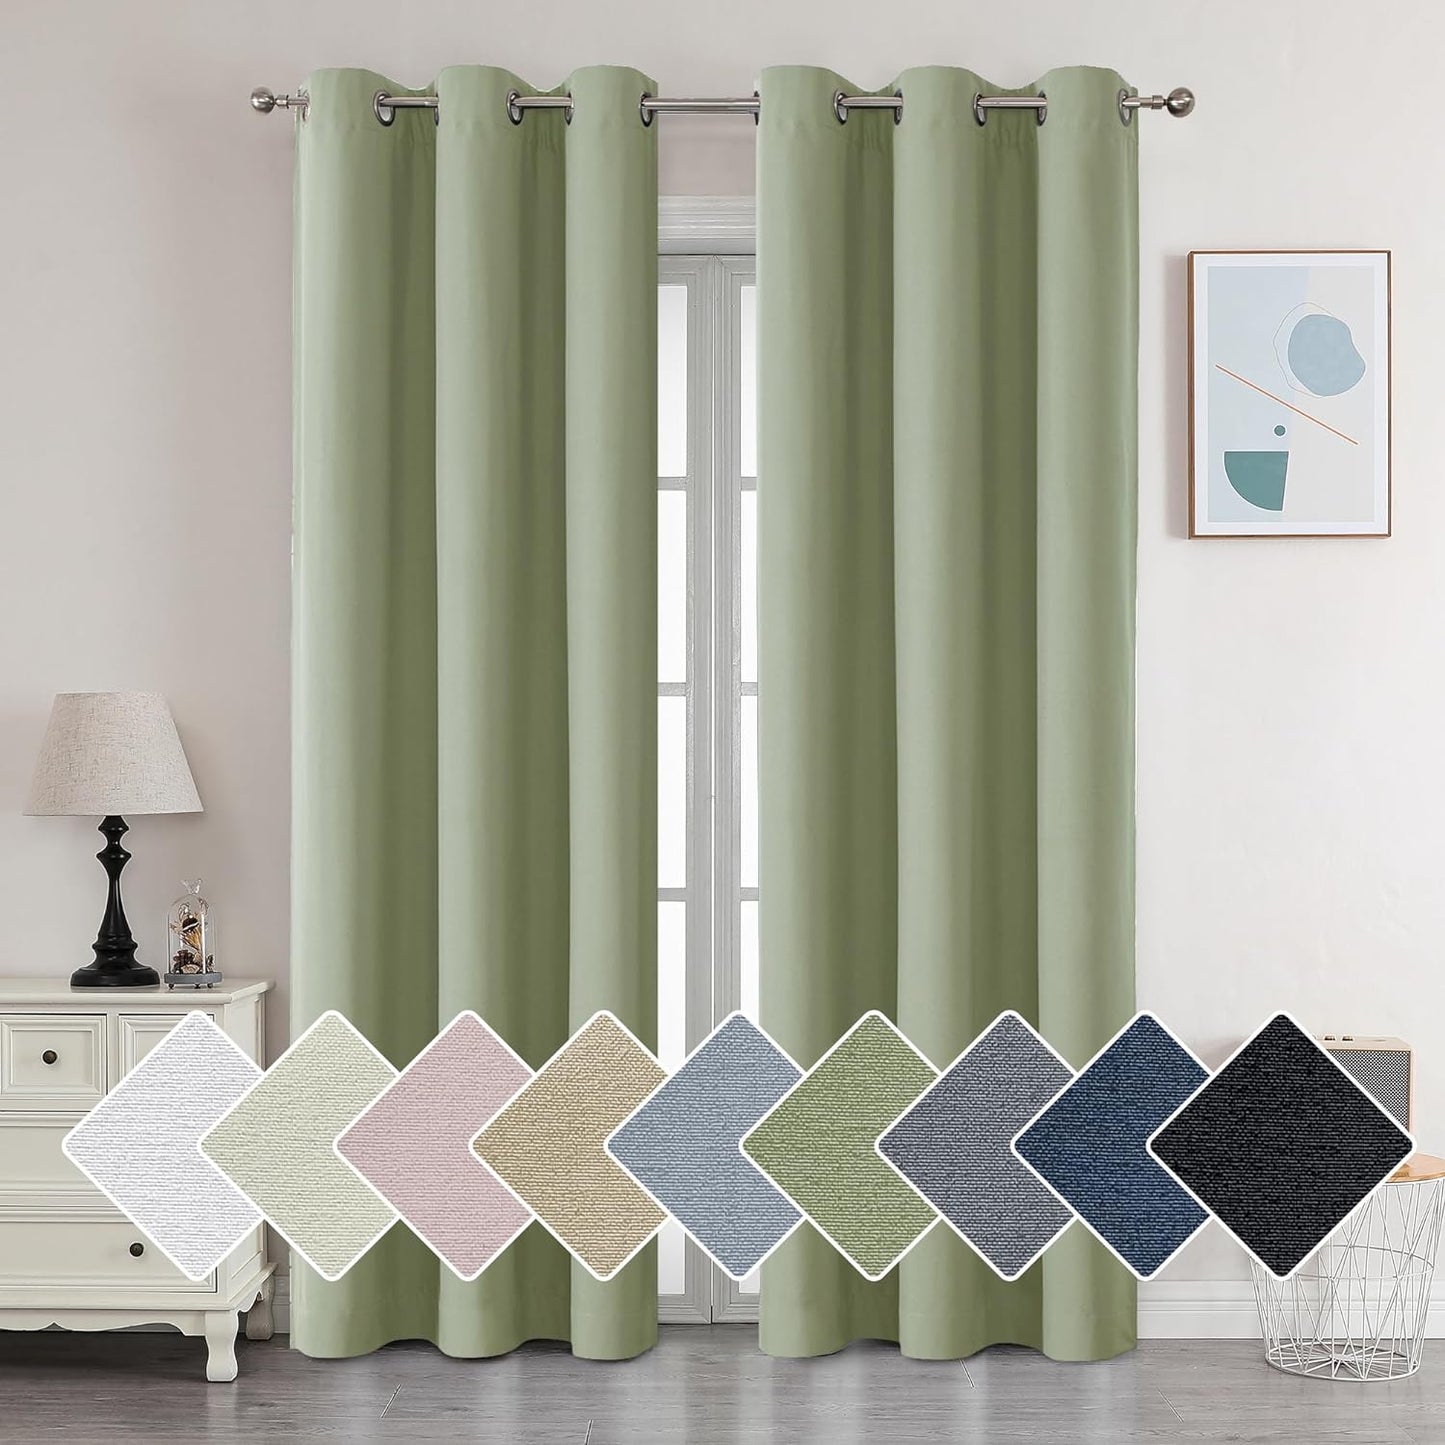 Aiyufeng Nika 100% Blackout Navy Blue Curtains 63 Inch Length 2 Panels Set, Energy Efficiency Grommet Solid Blue Blackout Curtains, Thermal Insulated Privacy for Bedroom Dining Room, W38 X L63In  Aiyufeng Sage Green 2X38X84" 